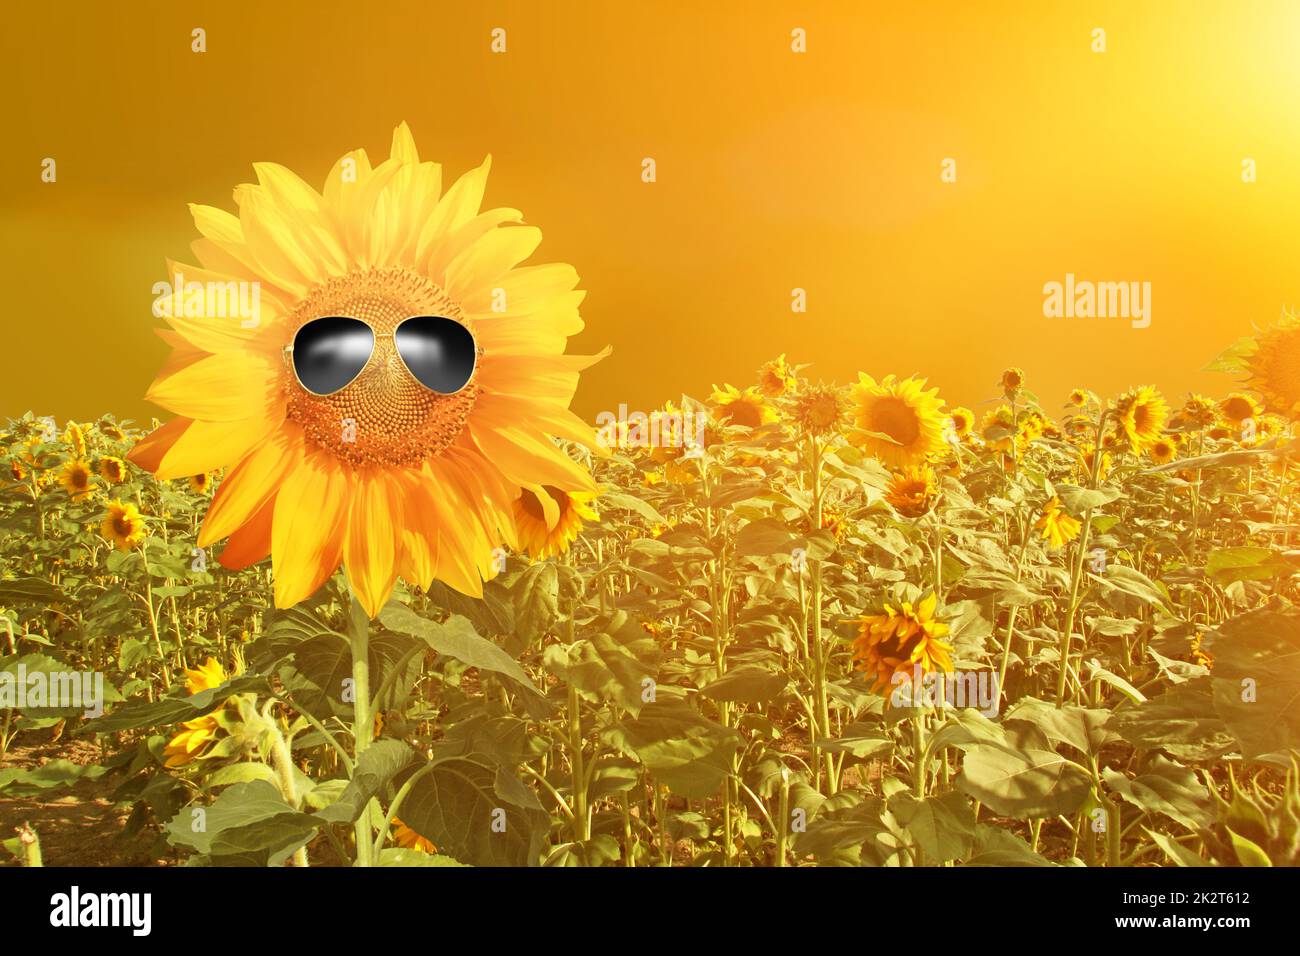 Funny sunflower with sunglasses on a sunset Stock Photo